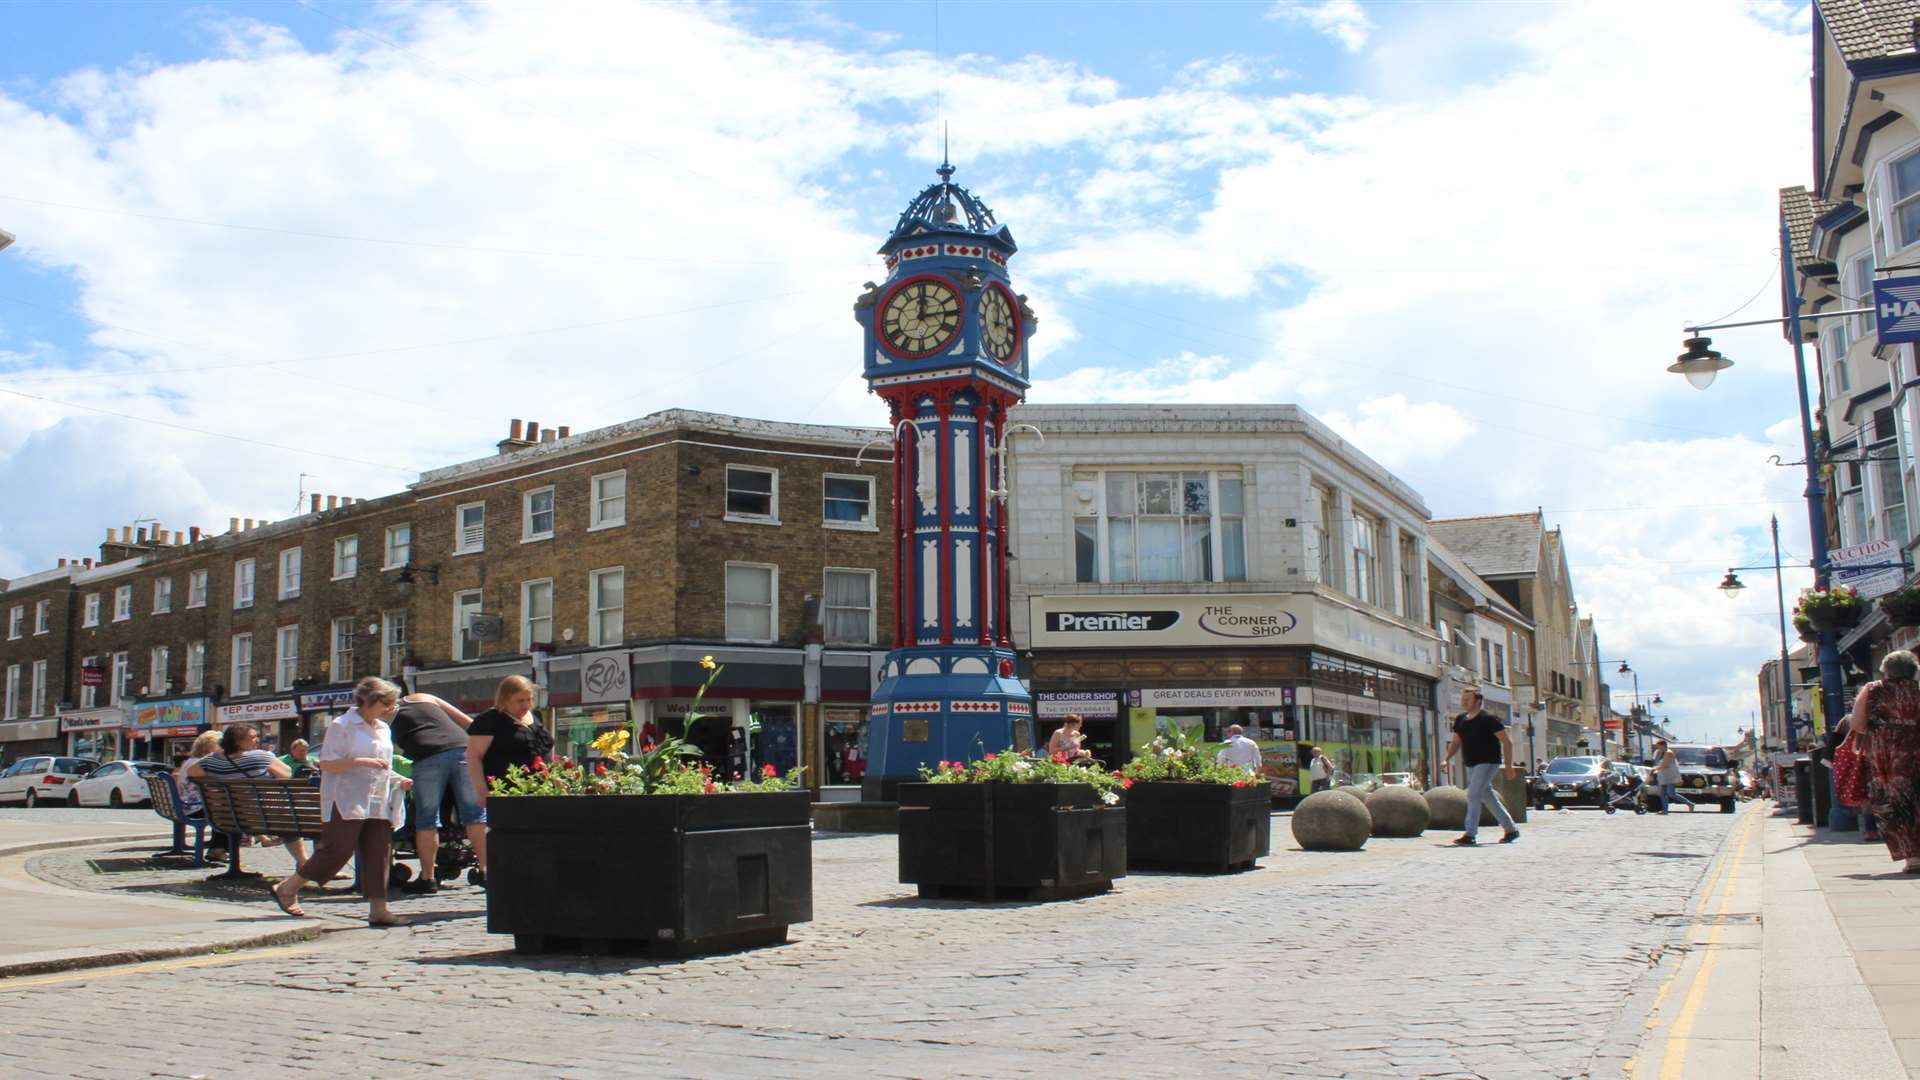 The colourful clocktower in Sheerness